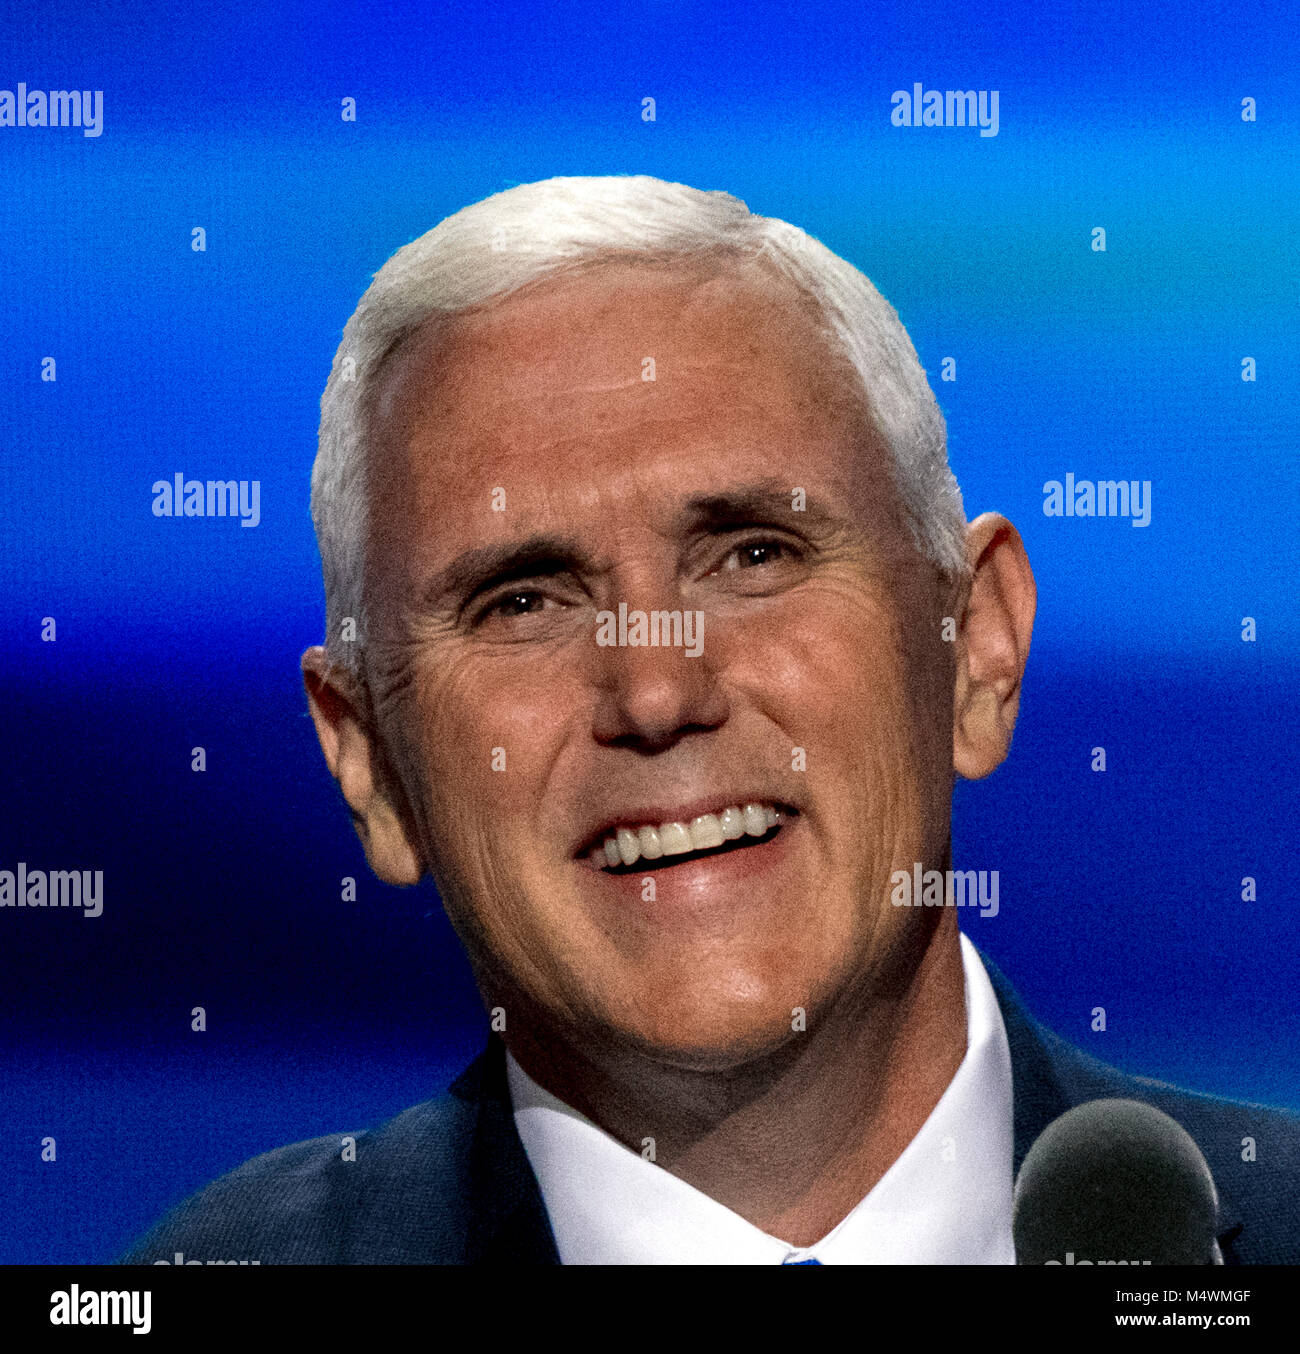 Cleveland Ohio, USA, 20th July, 2016. Republican Governor and now VIce-Presidential candidate Michael "Mike" Pence addresses the Republican National Convention in the Quicken Arena. Stock Photo